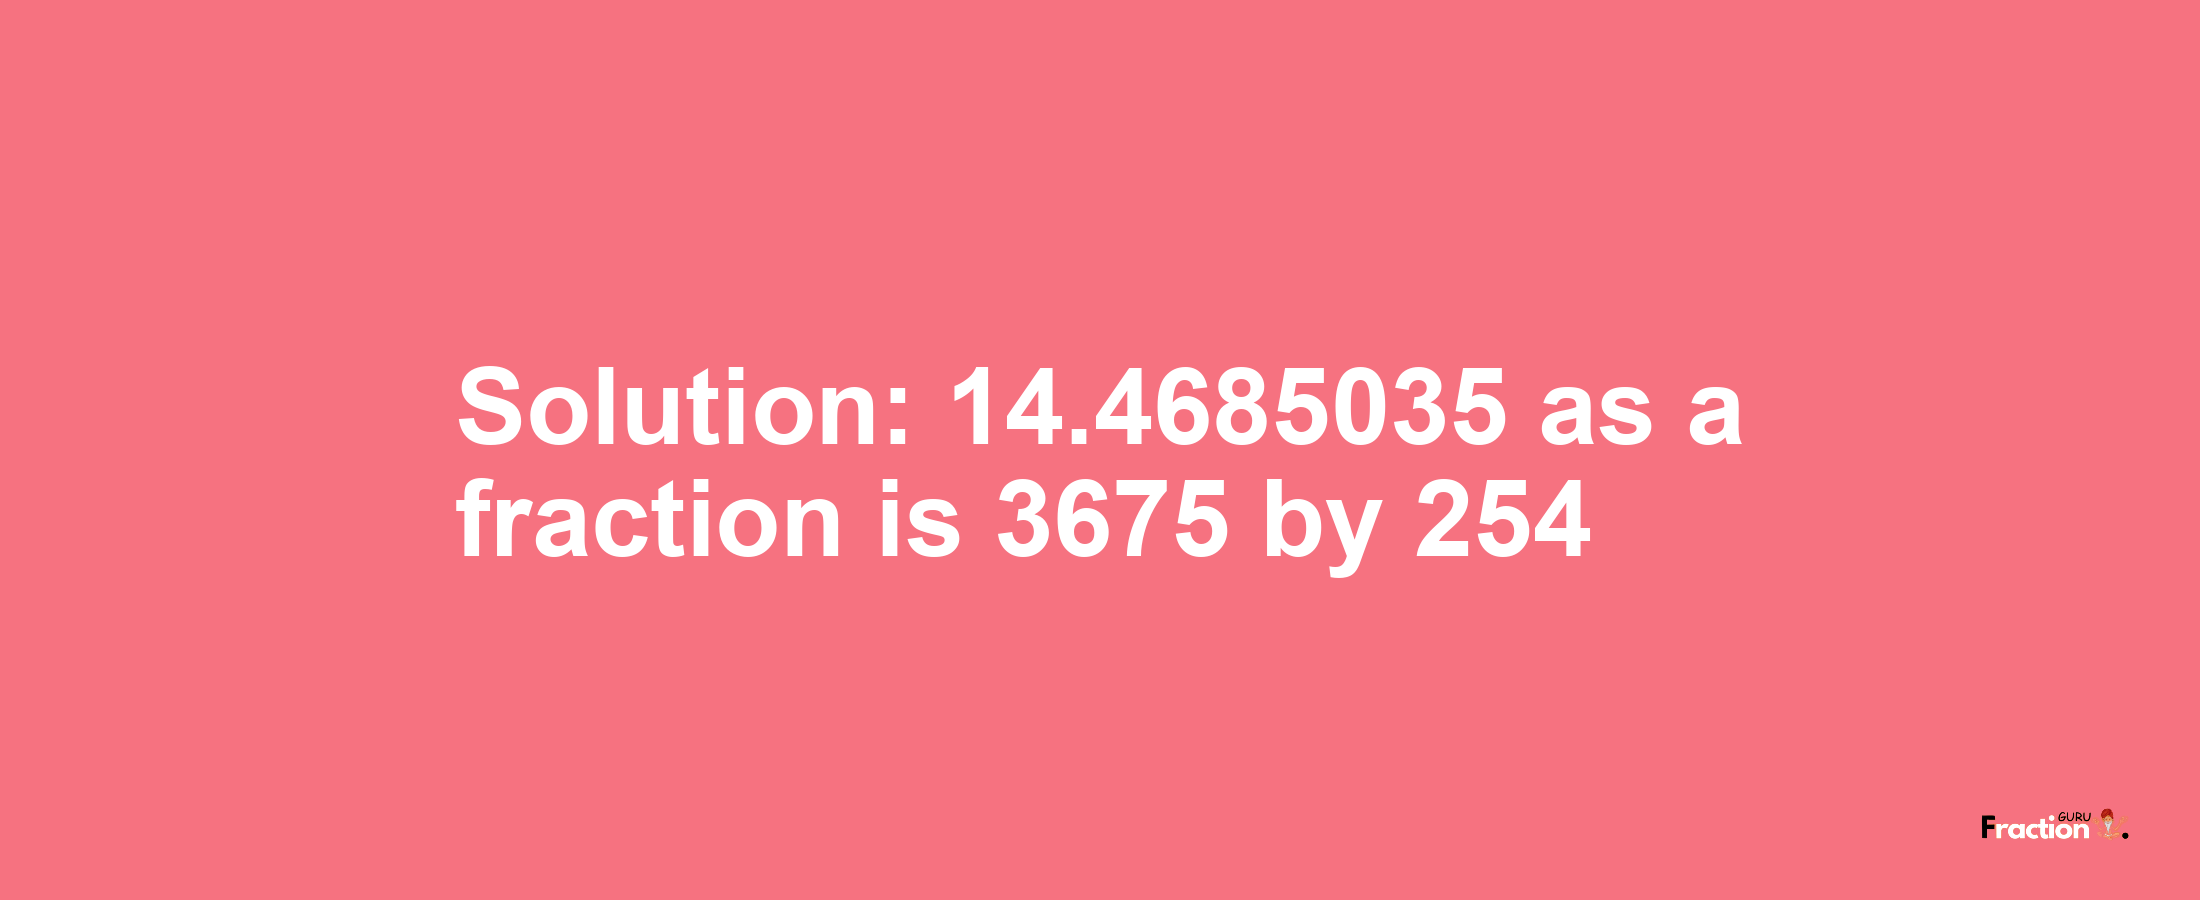 Solution:14.4685035 as a fraction is 3675/254